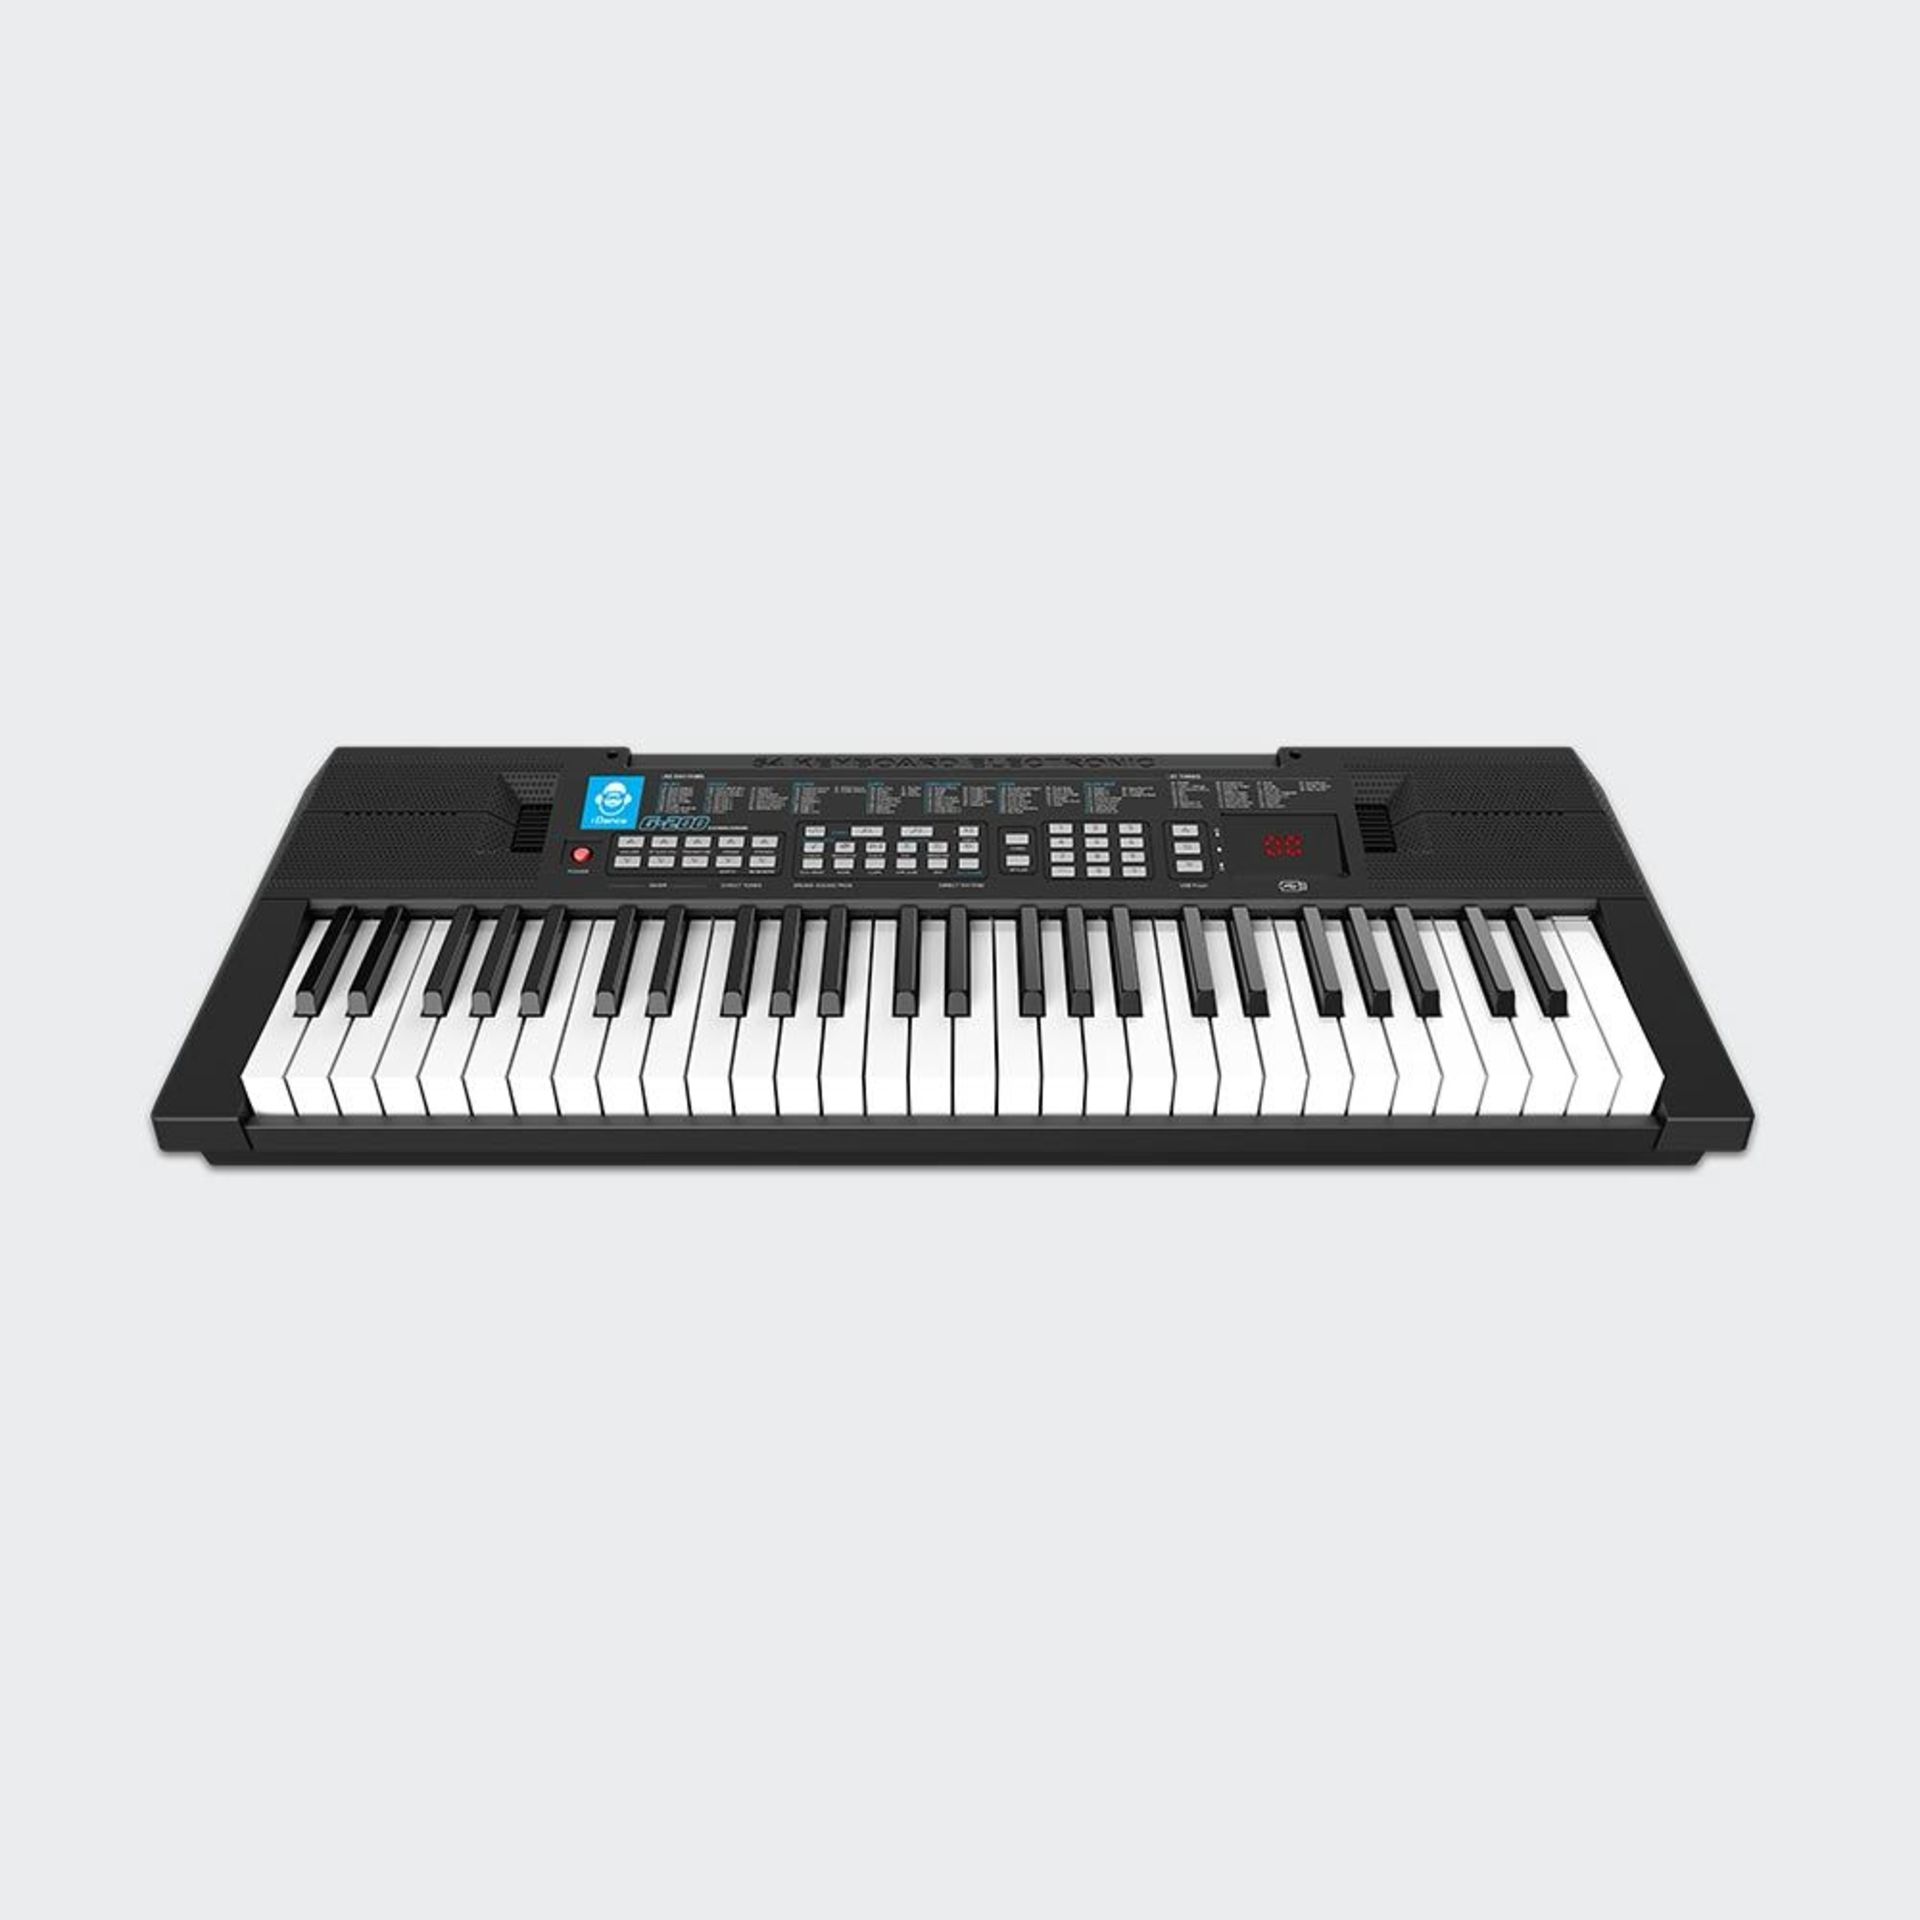 (R11E) 1x iDance Electronic Keyboard G200. 27 Tones. USB MP3 Player. 83 Percussion Styles. (Power L